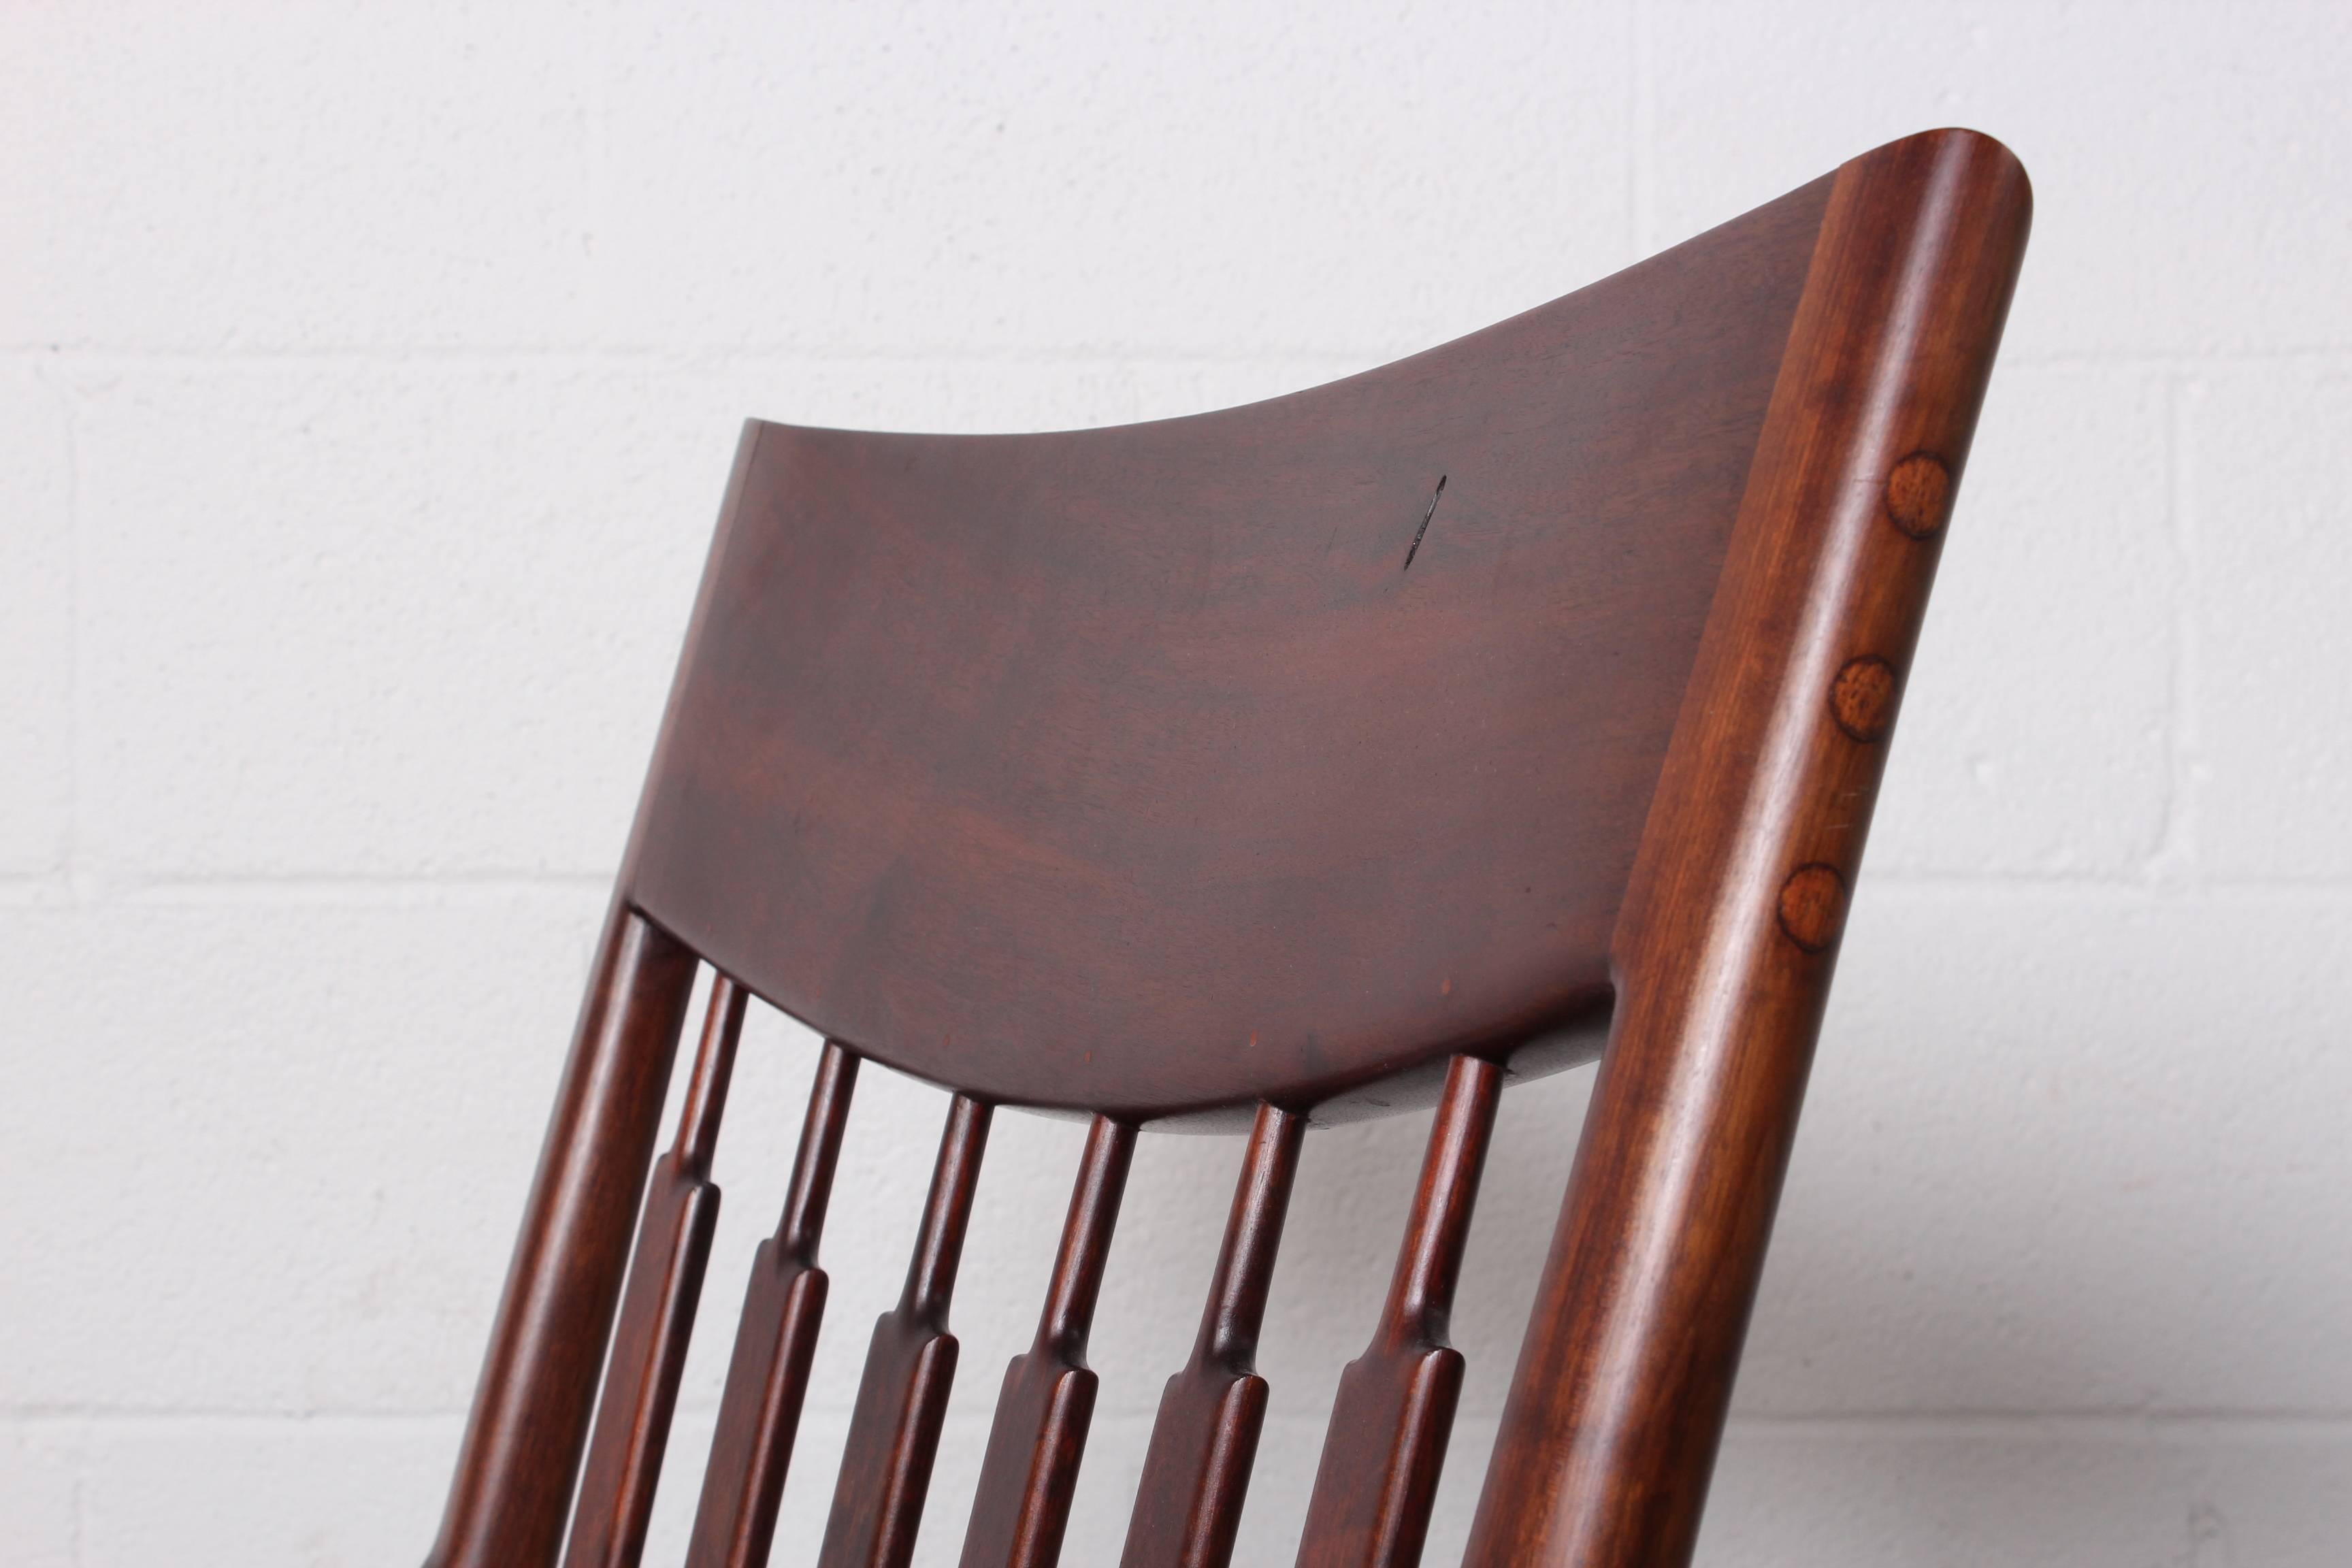 Handcrafted walnut lounge chair by California craftsman John Nyquist.